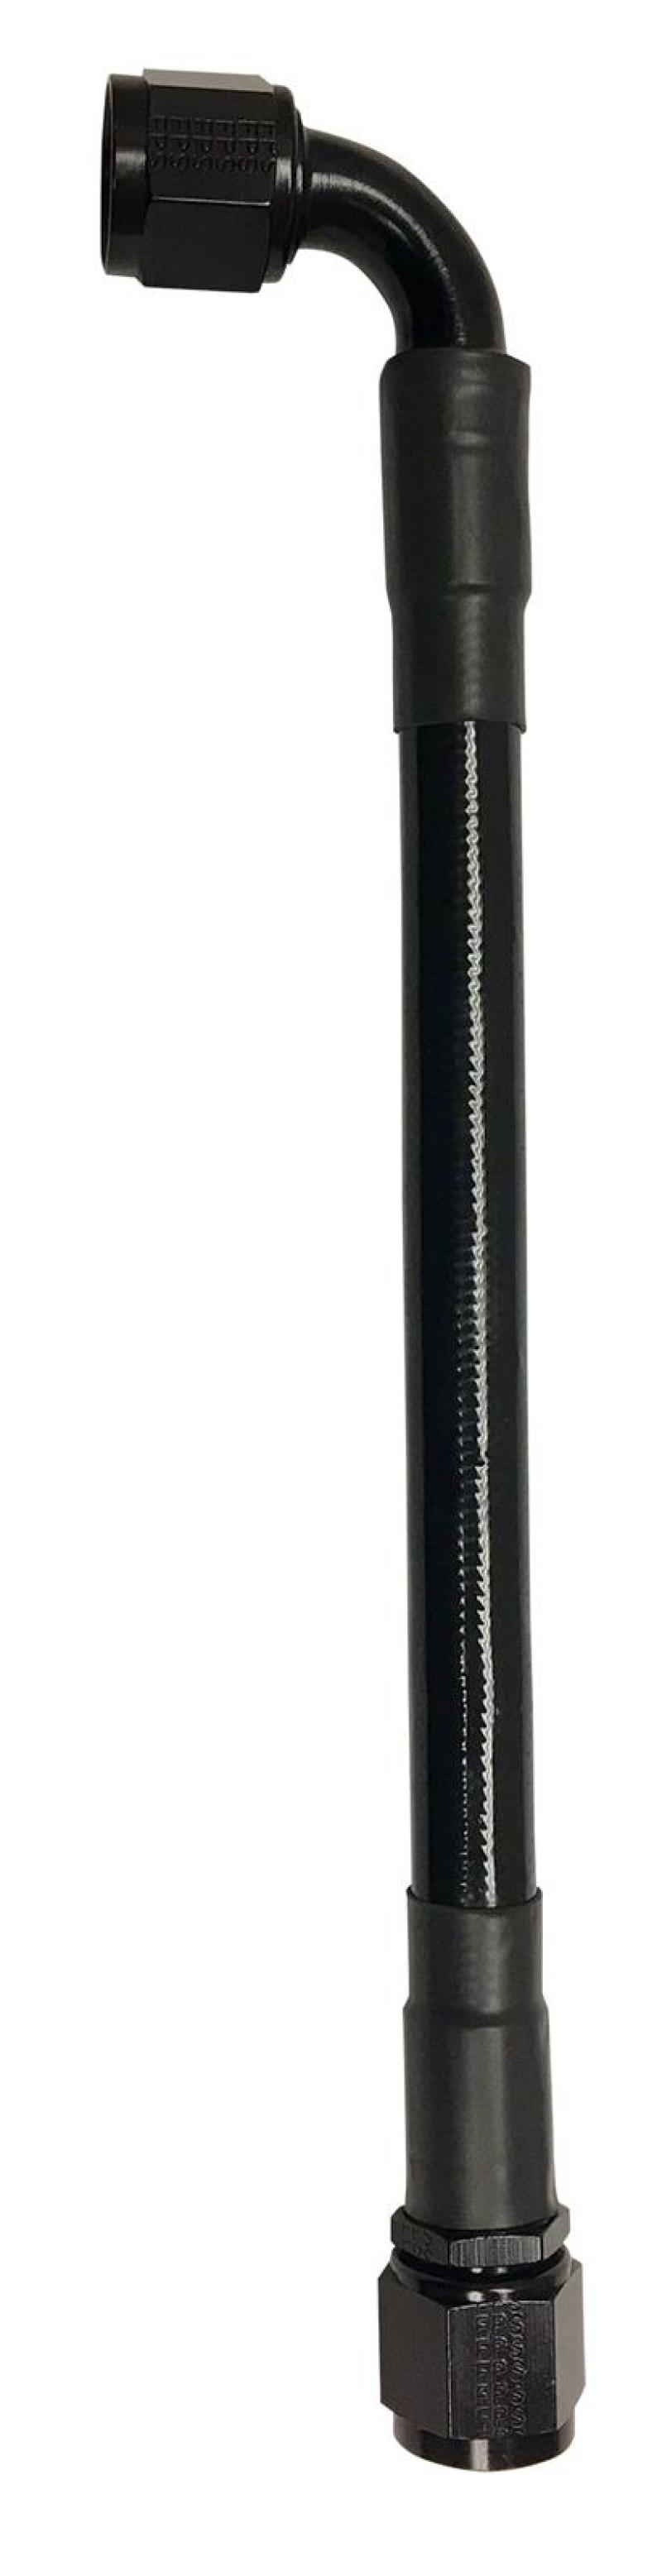 Fragola -10AN Ext Black PTFE Hose Assembly Straight x 90 Degree 30in - 6029-1-2-30BL